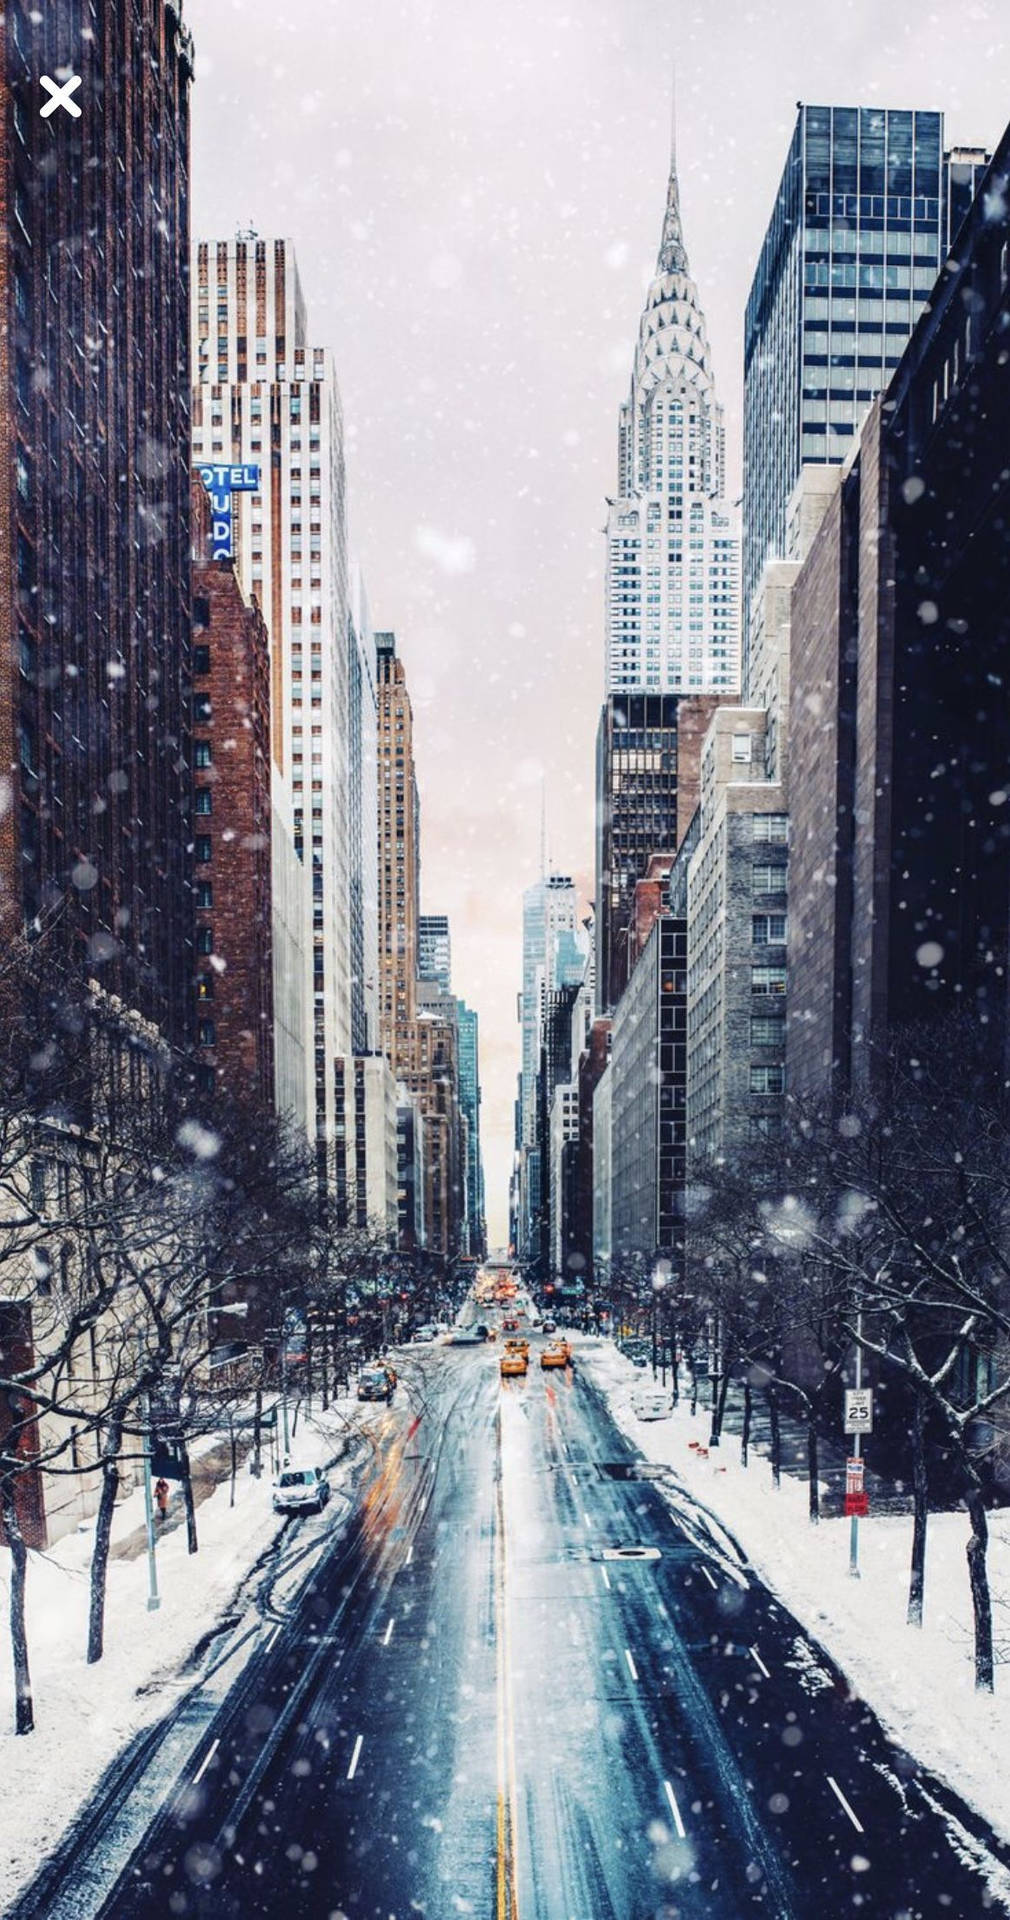 A snowy street with cars driving down it - New York